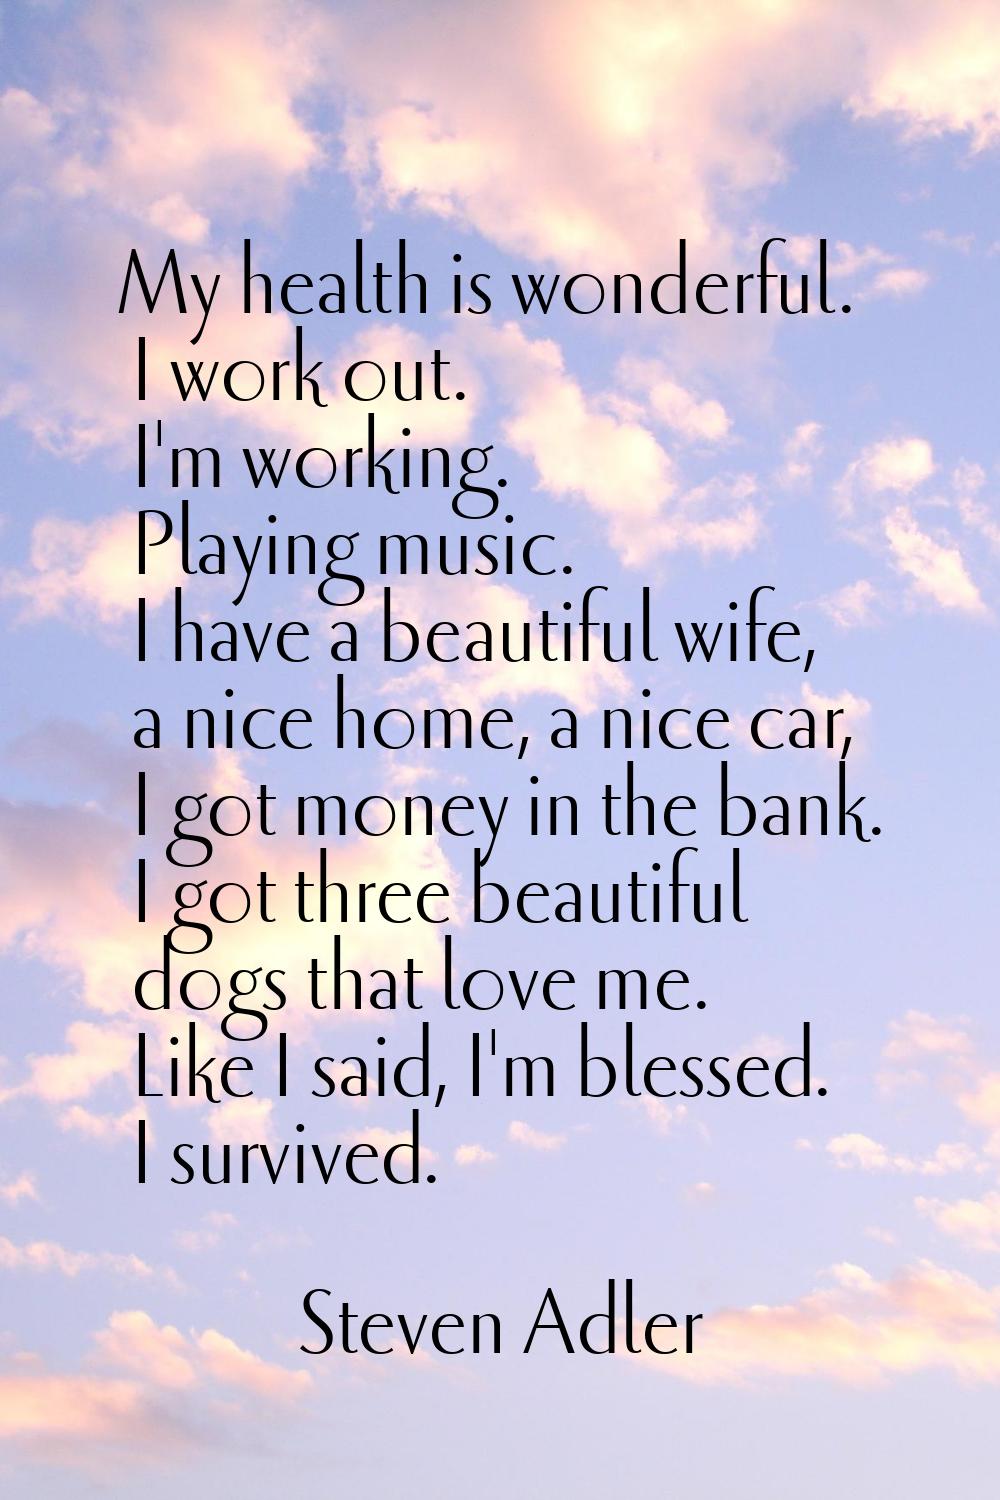 My health is wonderful. I work out. I'm working. Playing music. I have a beautiful wife, a nice hom